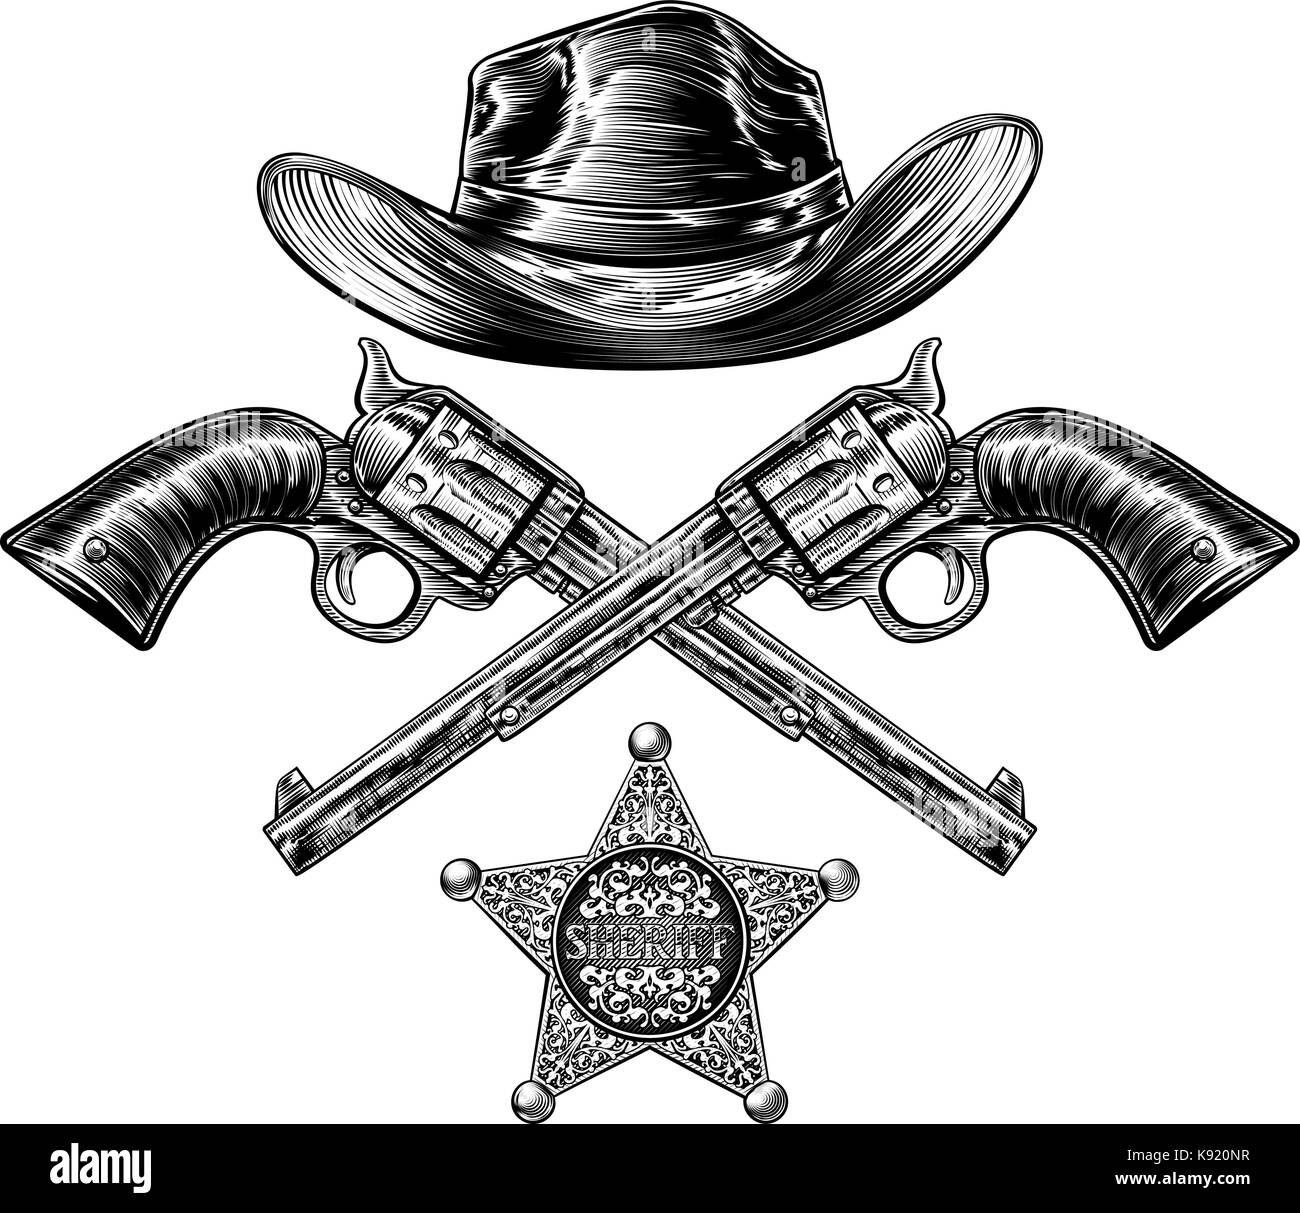 Pistols and Cowboy Hat with Sheriff Star Badge Stock Vector